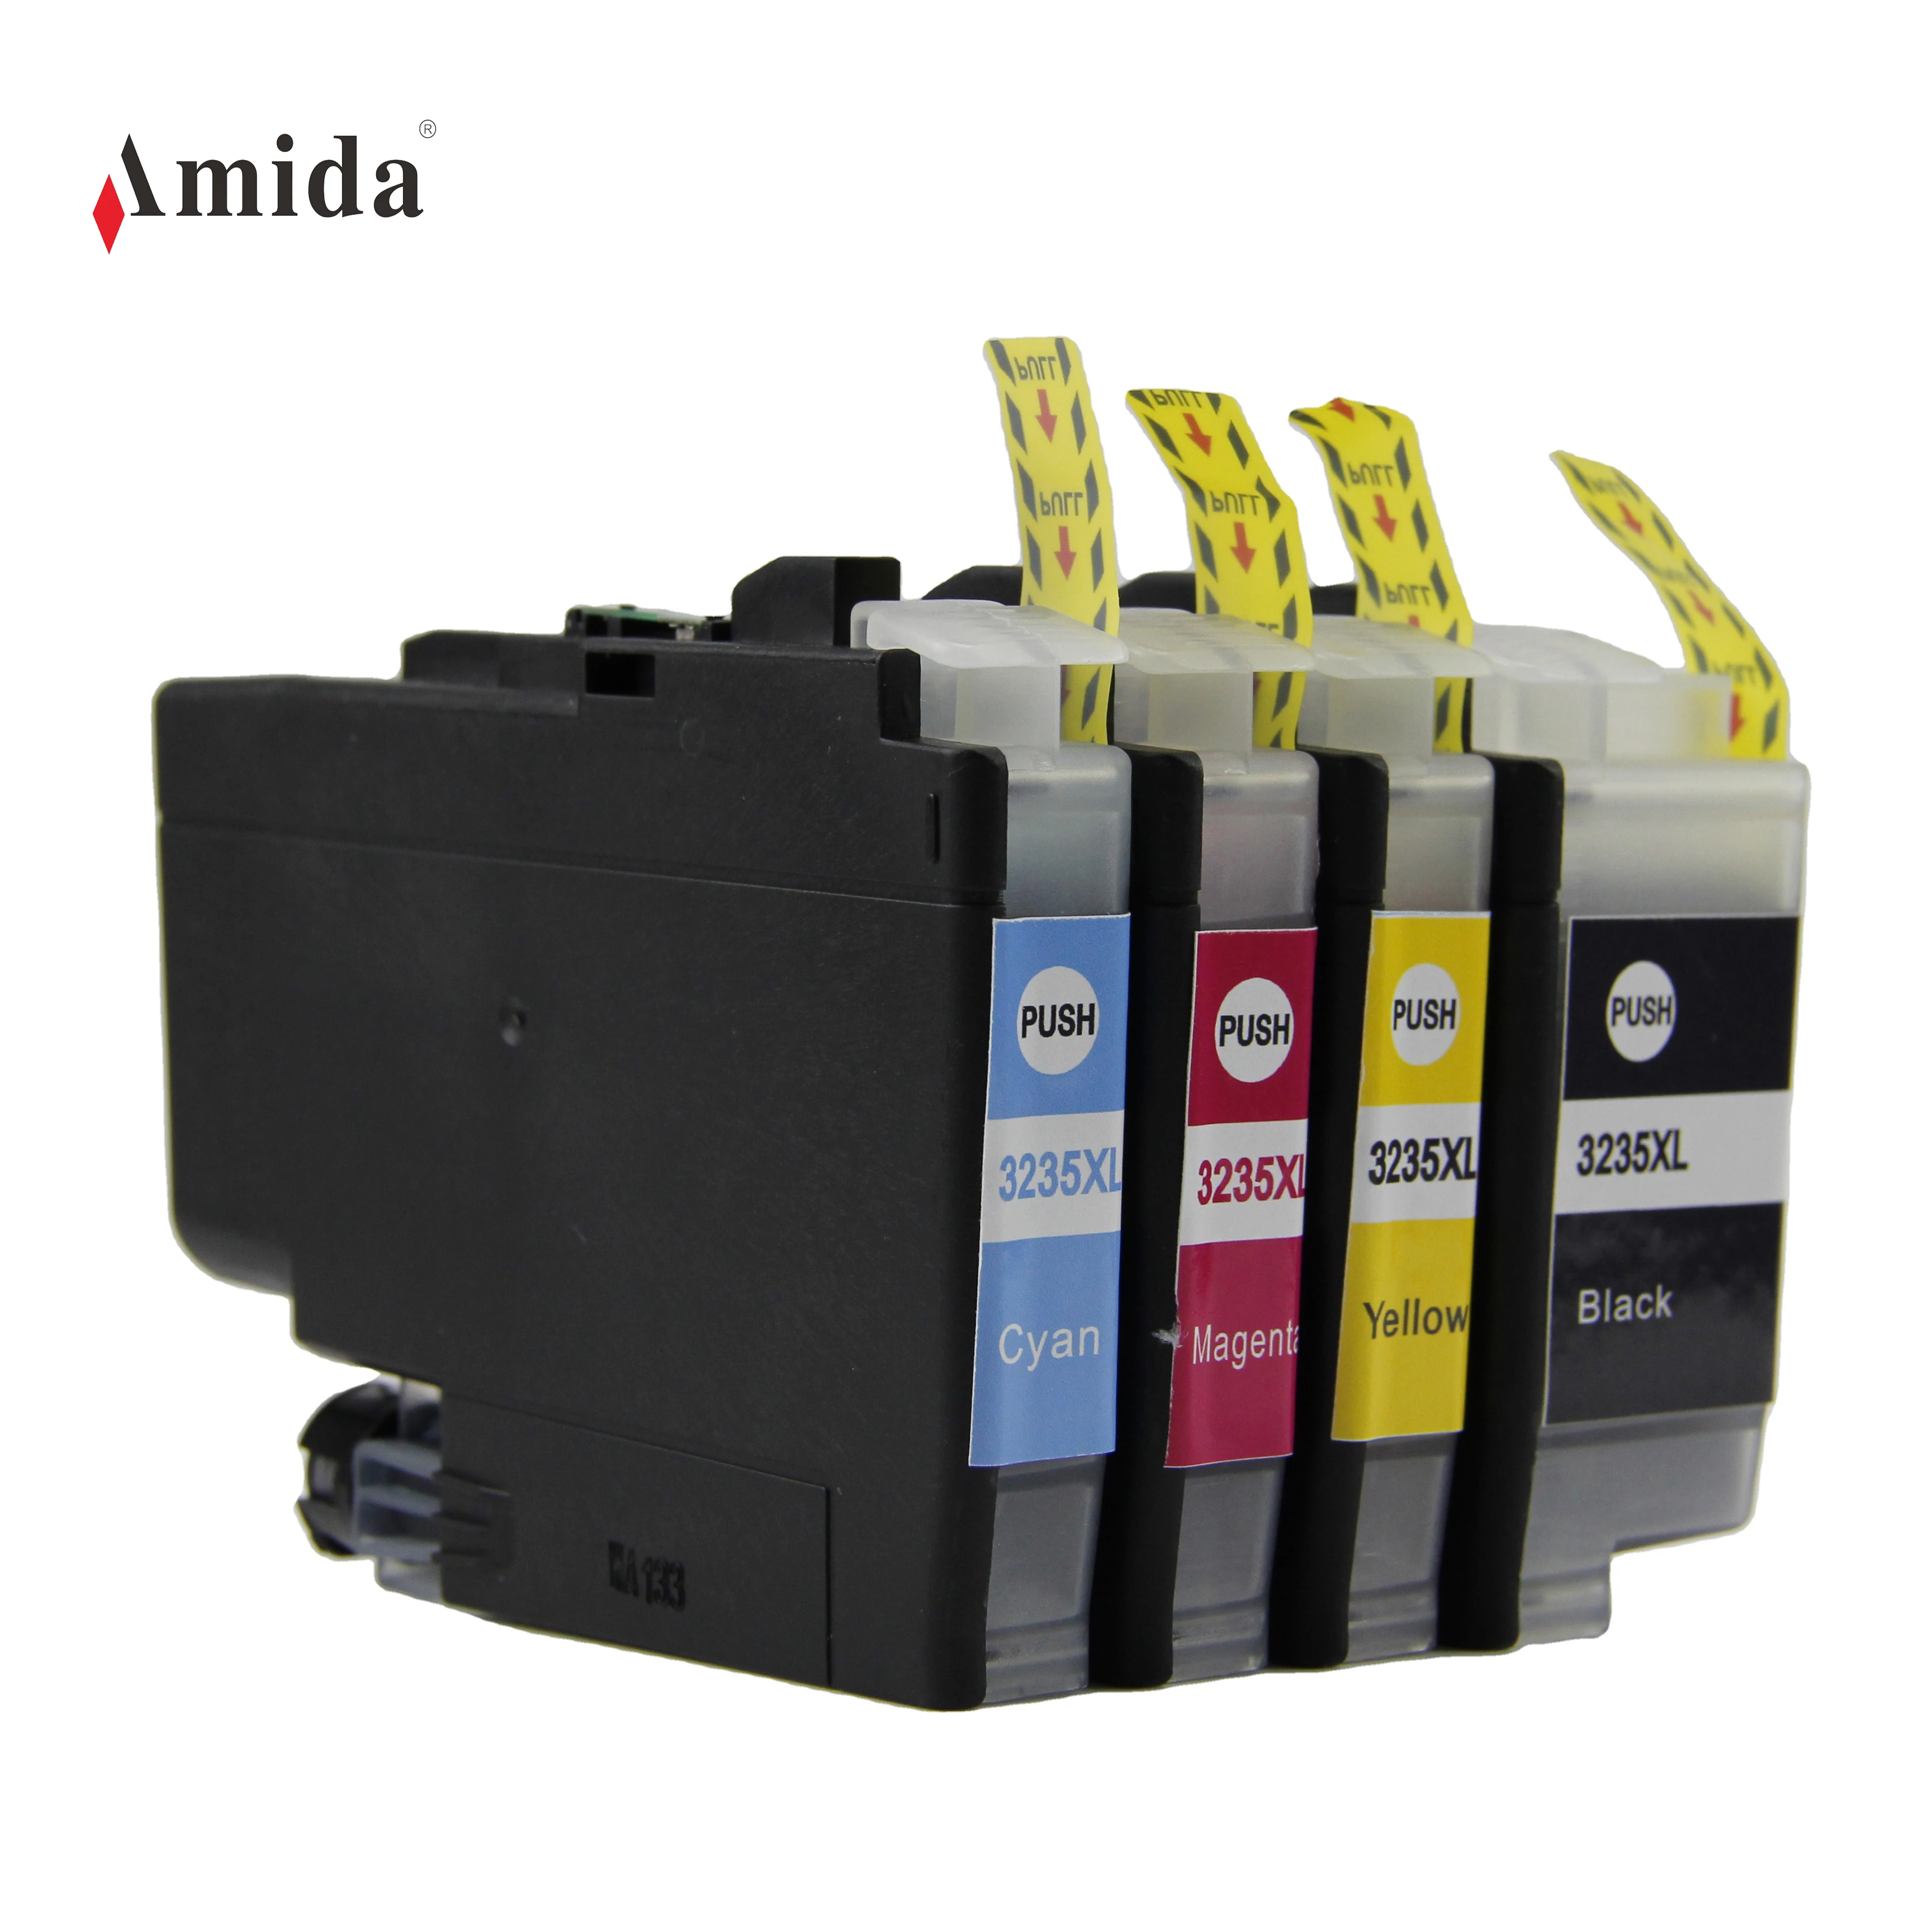 Amida Ink Cartridge LC3235XL Color Compatible  for DCP-J1100DW/MFC-J1300DW Printer LC3235XL